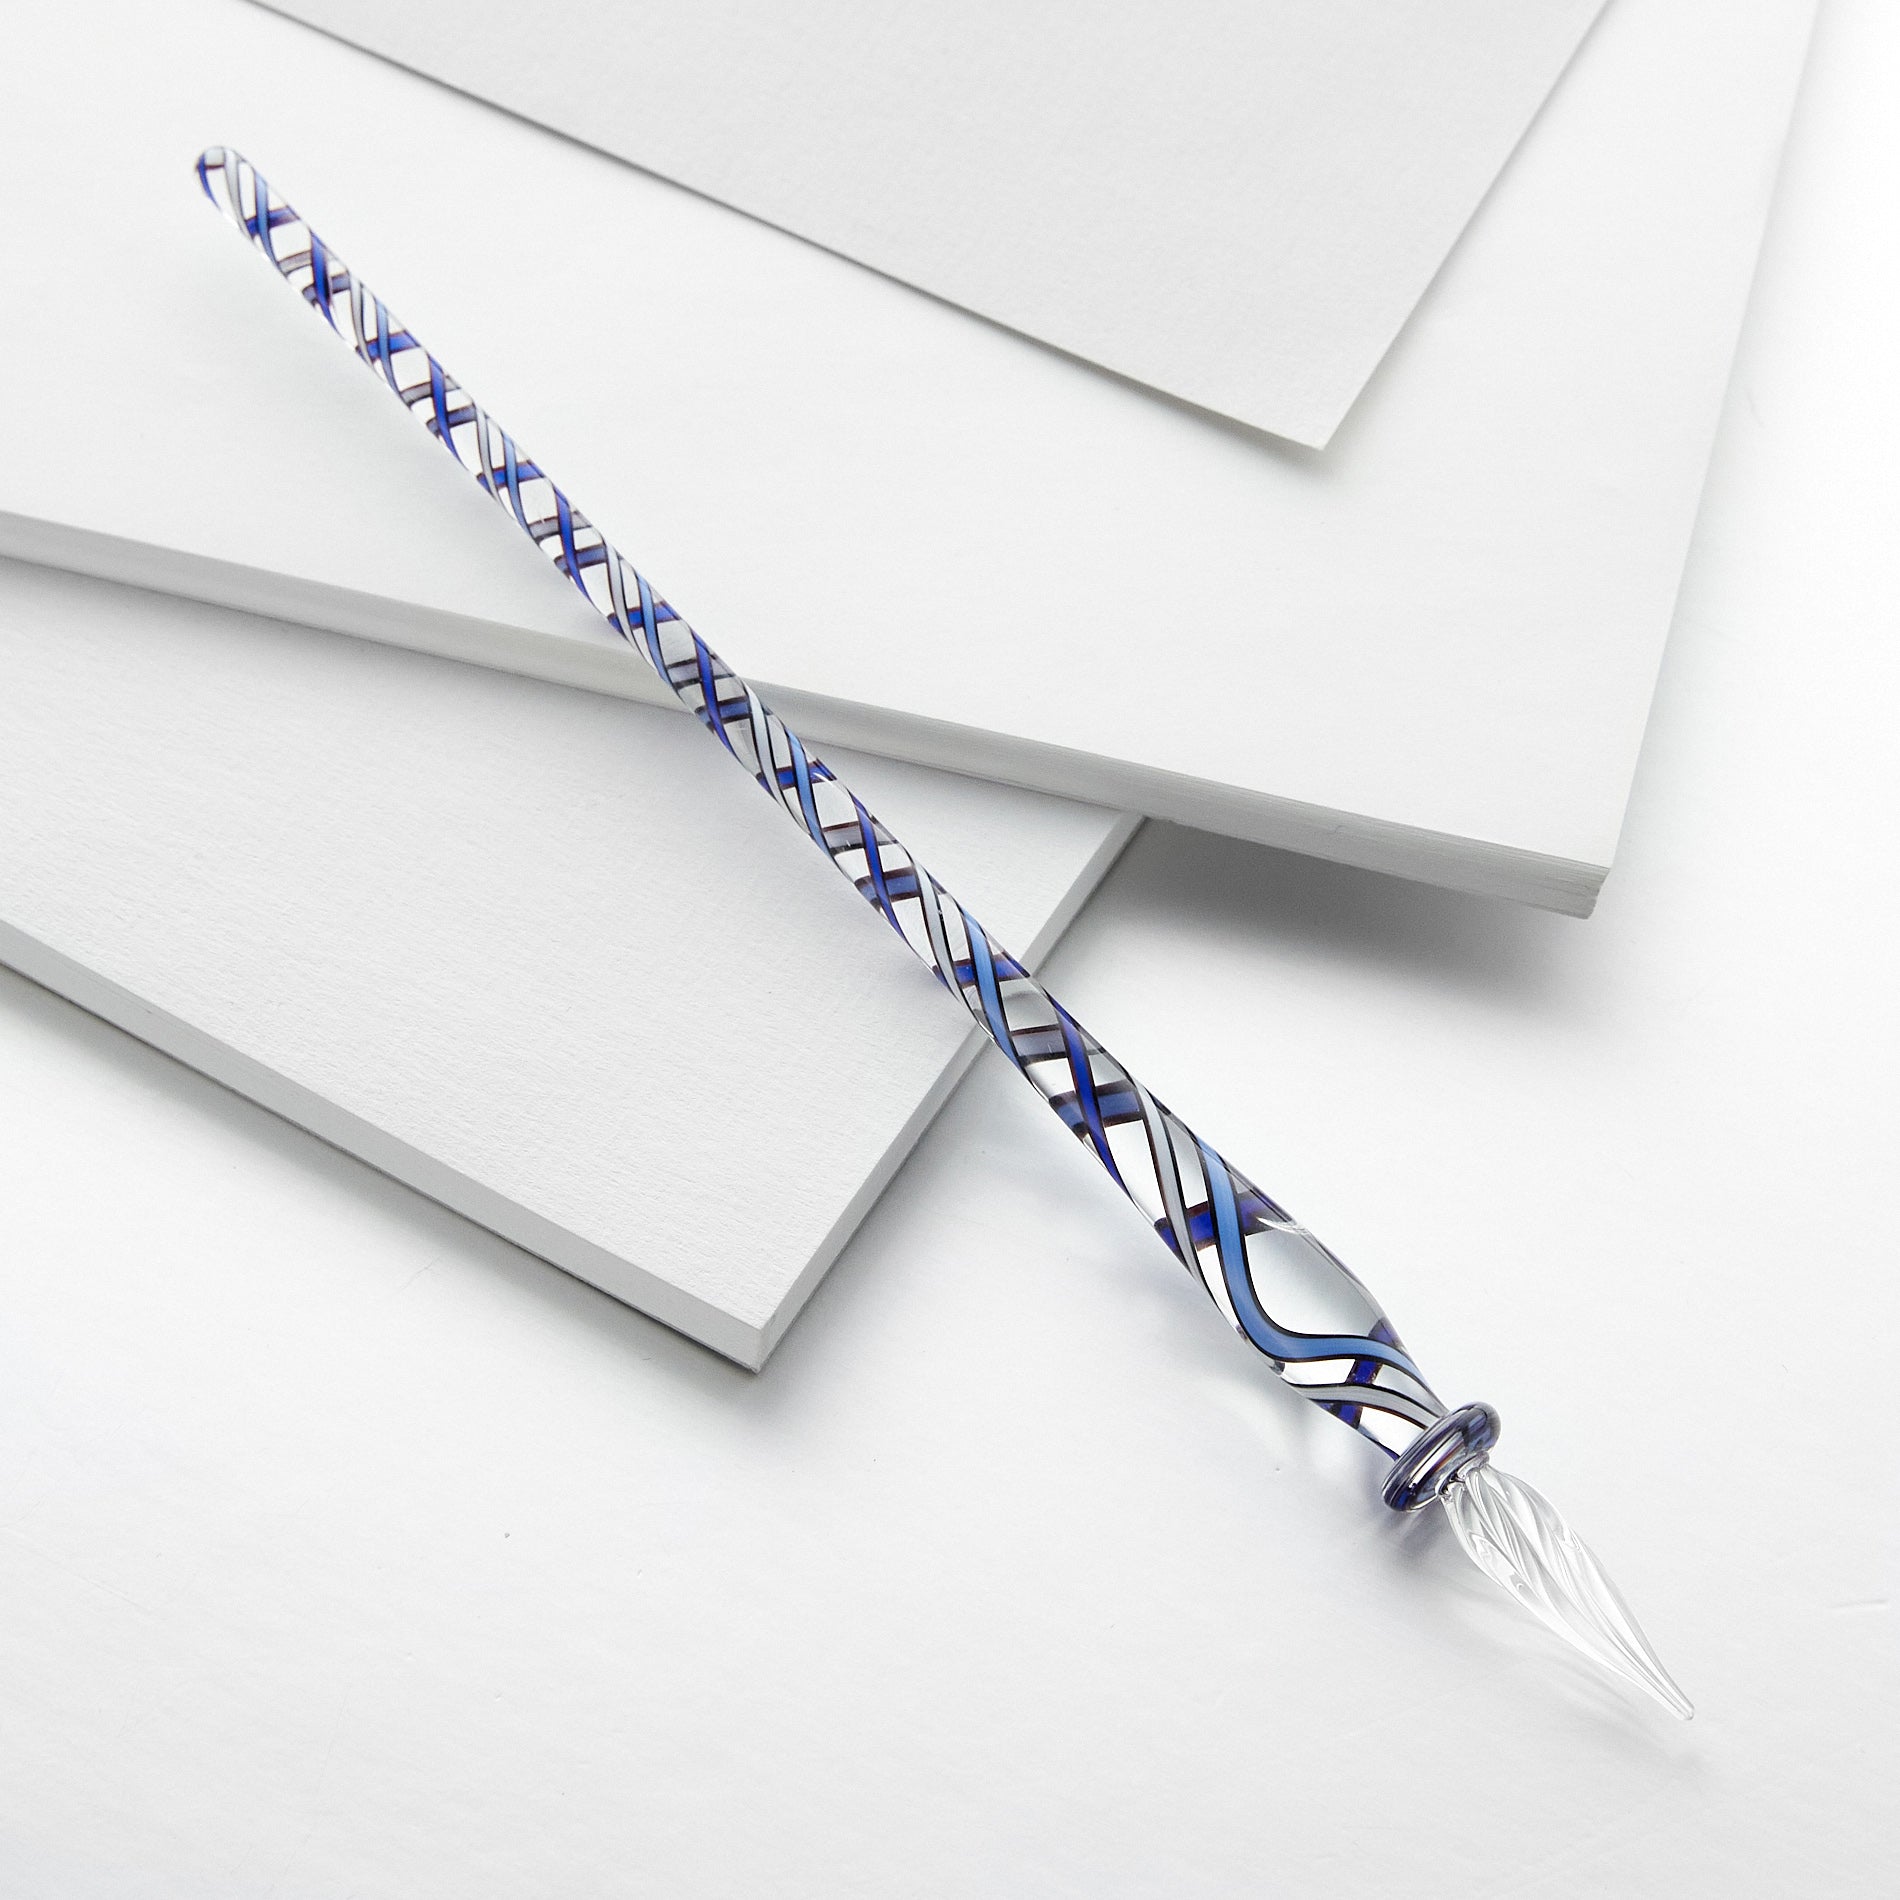 Drillog reinvents the glass dip pen